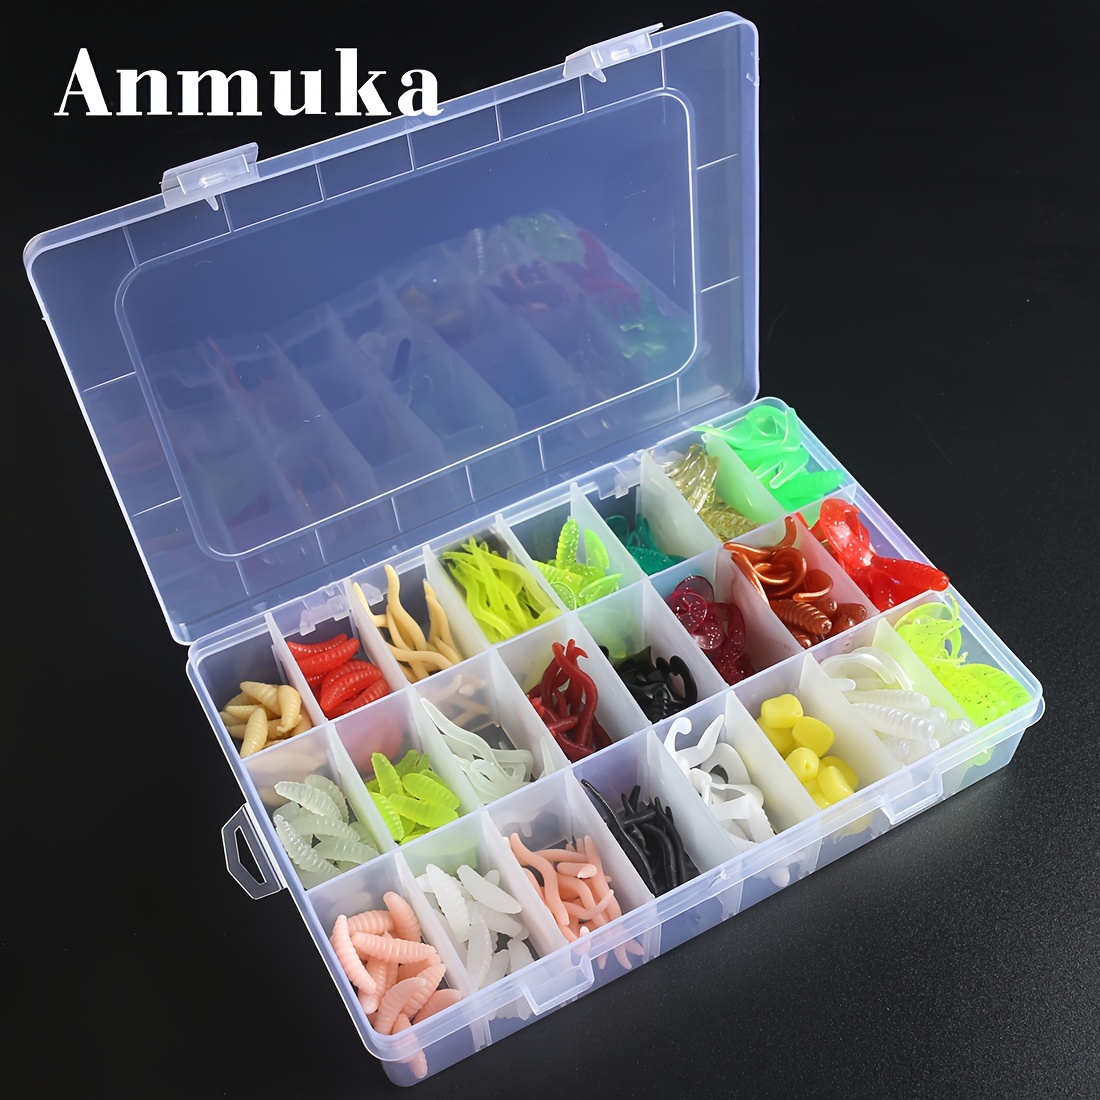 

285pcs/190pcs Premium Soft Fishing Lures Variety Pack - Includes Bread Worms, Red Worms, Earthworms, Single And Double Tail Shrimp - Perfect For Freshwater And Saltwater Fishing